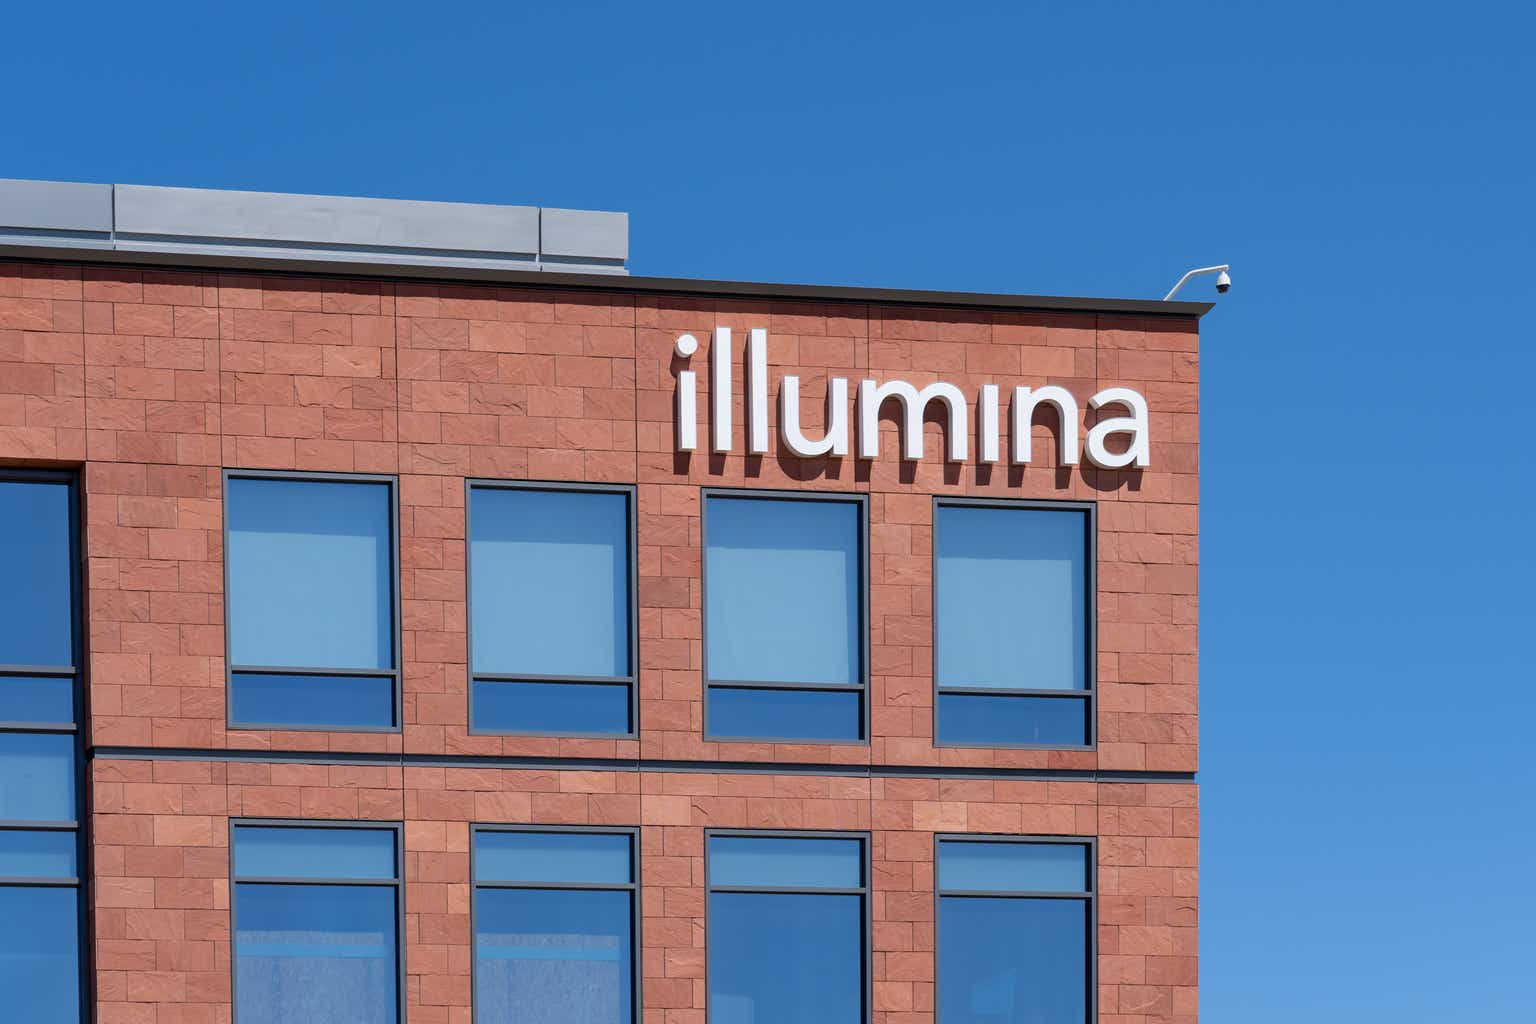 The Market Continues To Underprice Illumina's Stock And Its Genomics Leadership